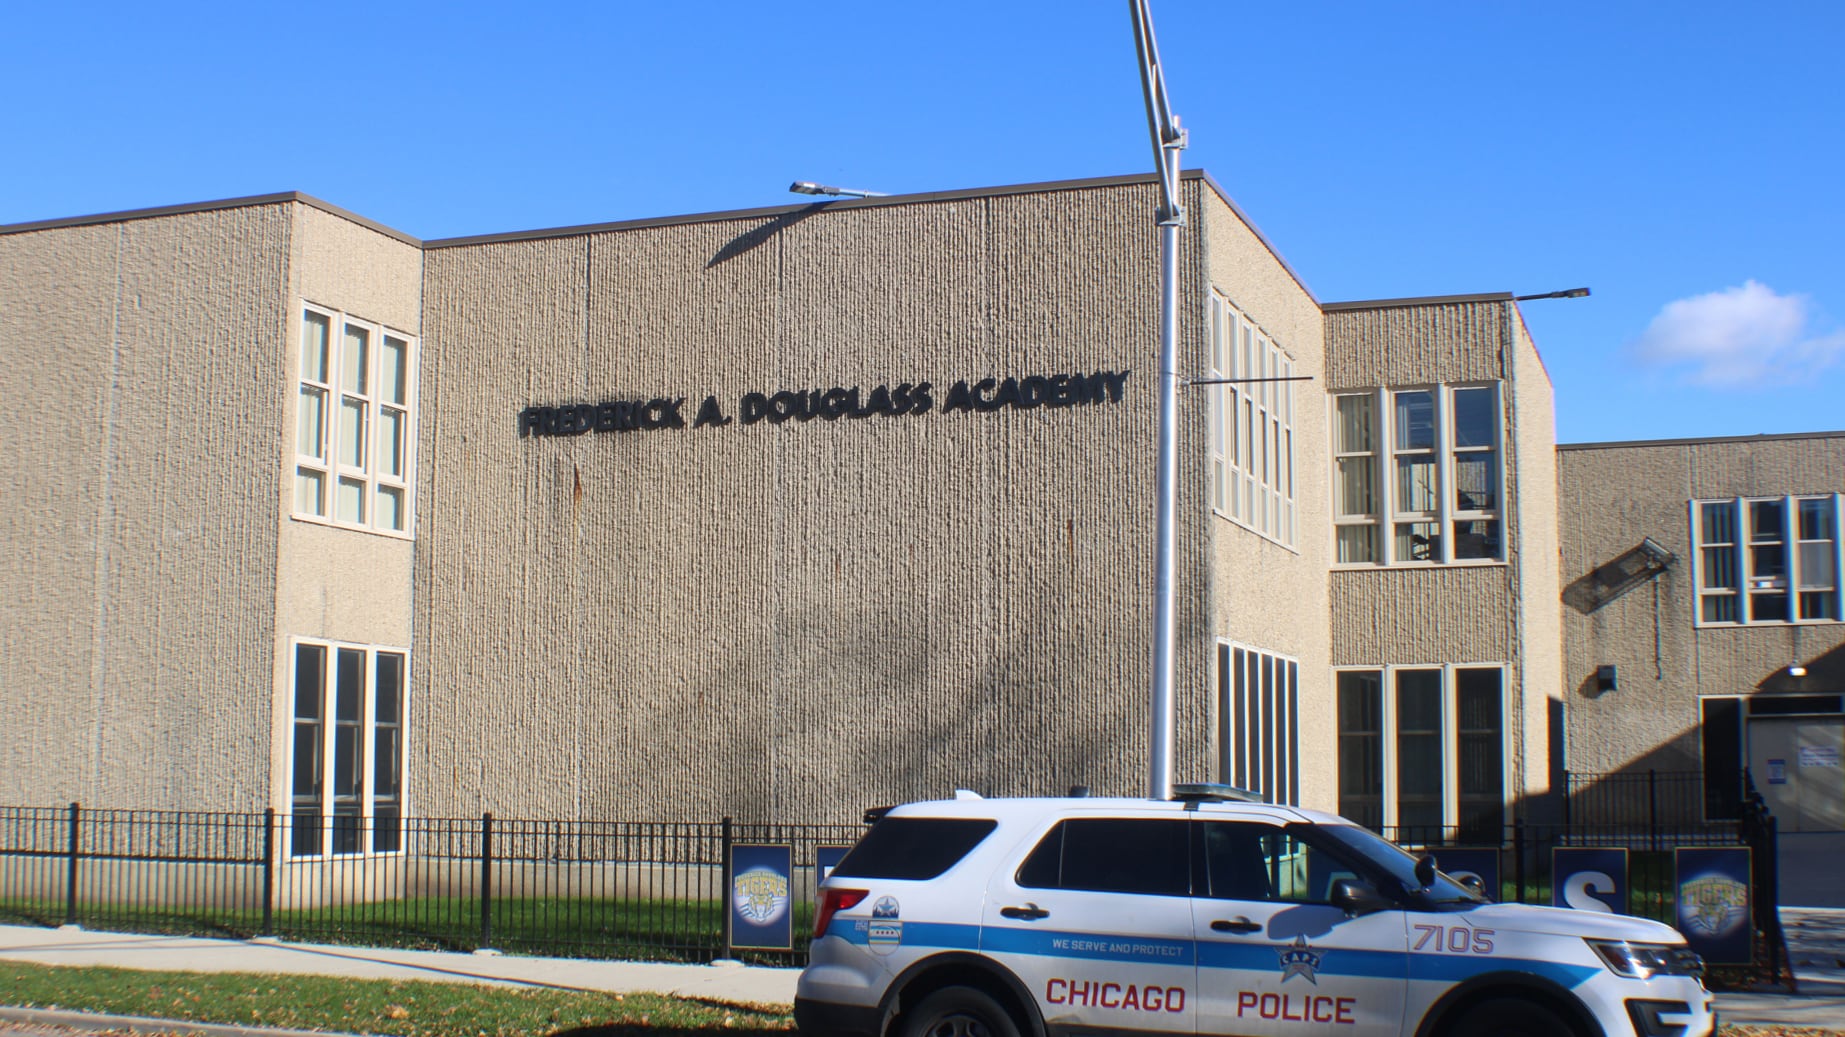 The side of a tan brick school with the name of the school on the side of the building with a Chicago Police car in the foreground.